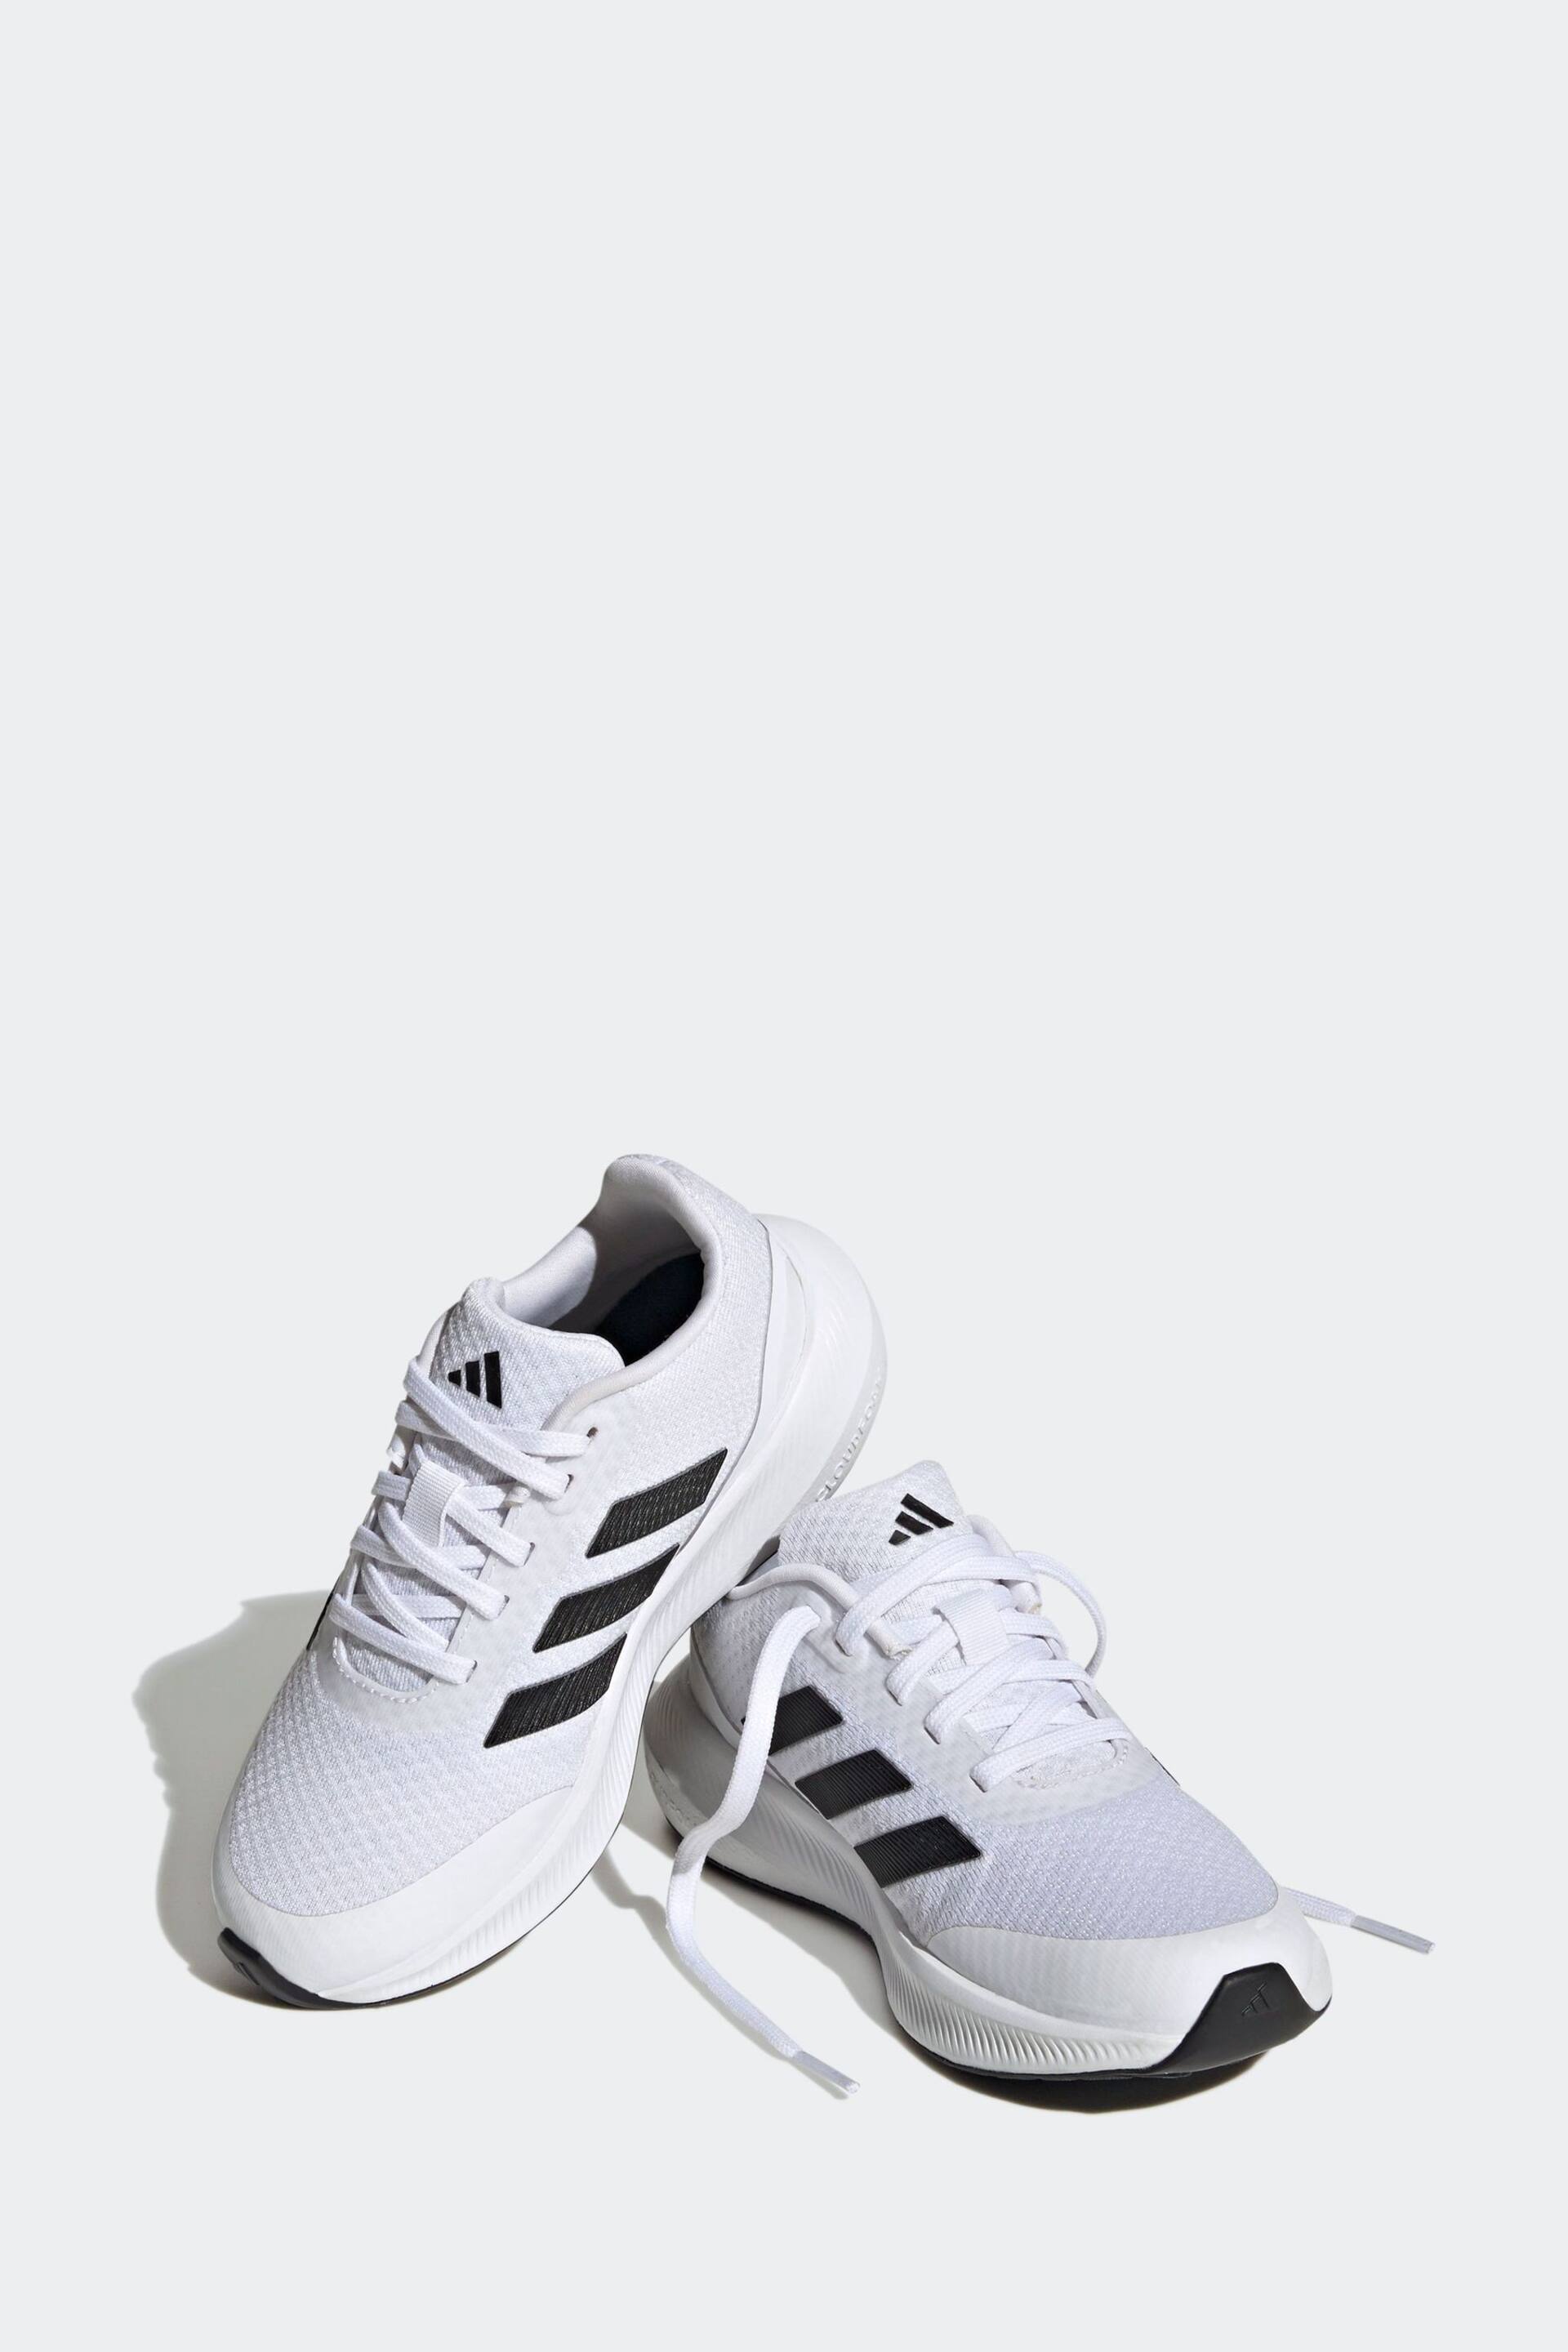 adidas White Runfalcon 3.0 Trainers - Image 4 of 9